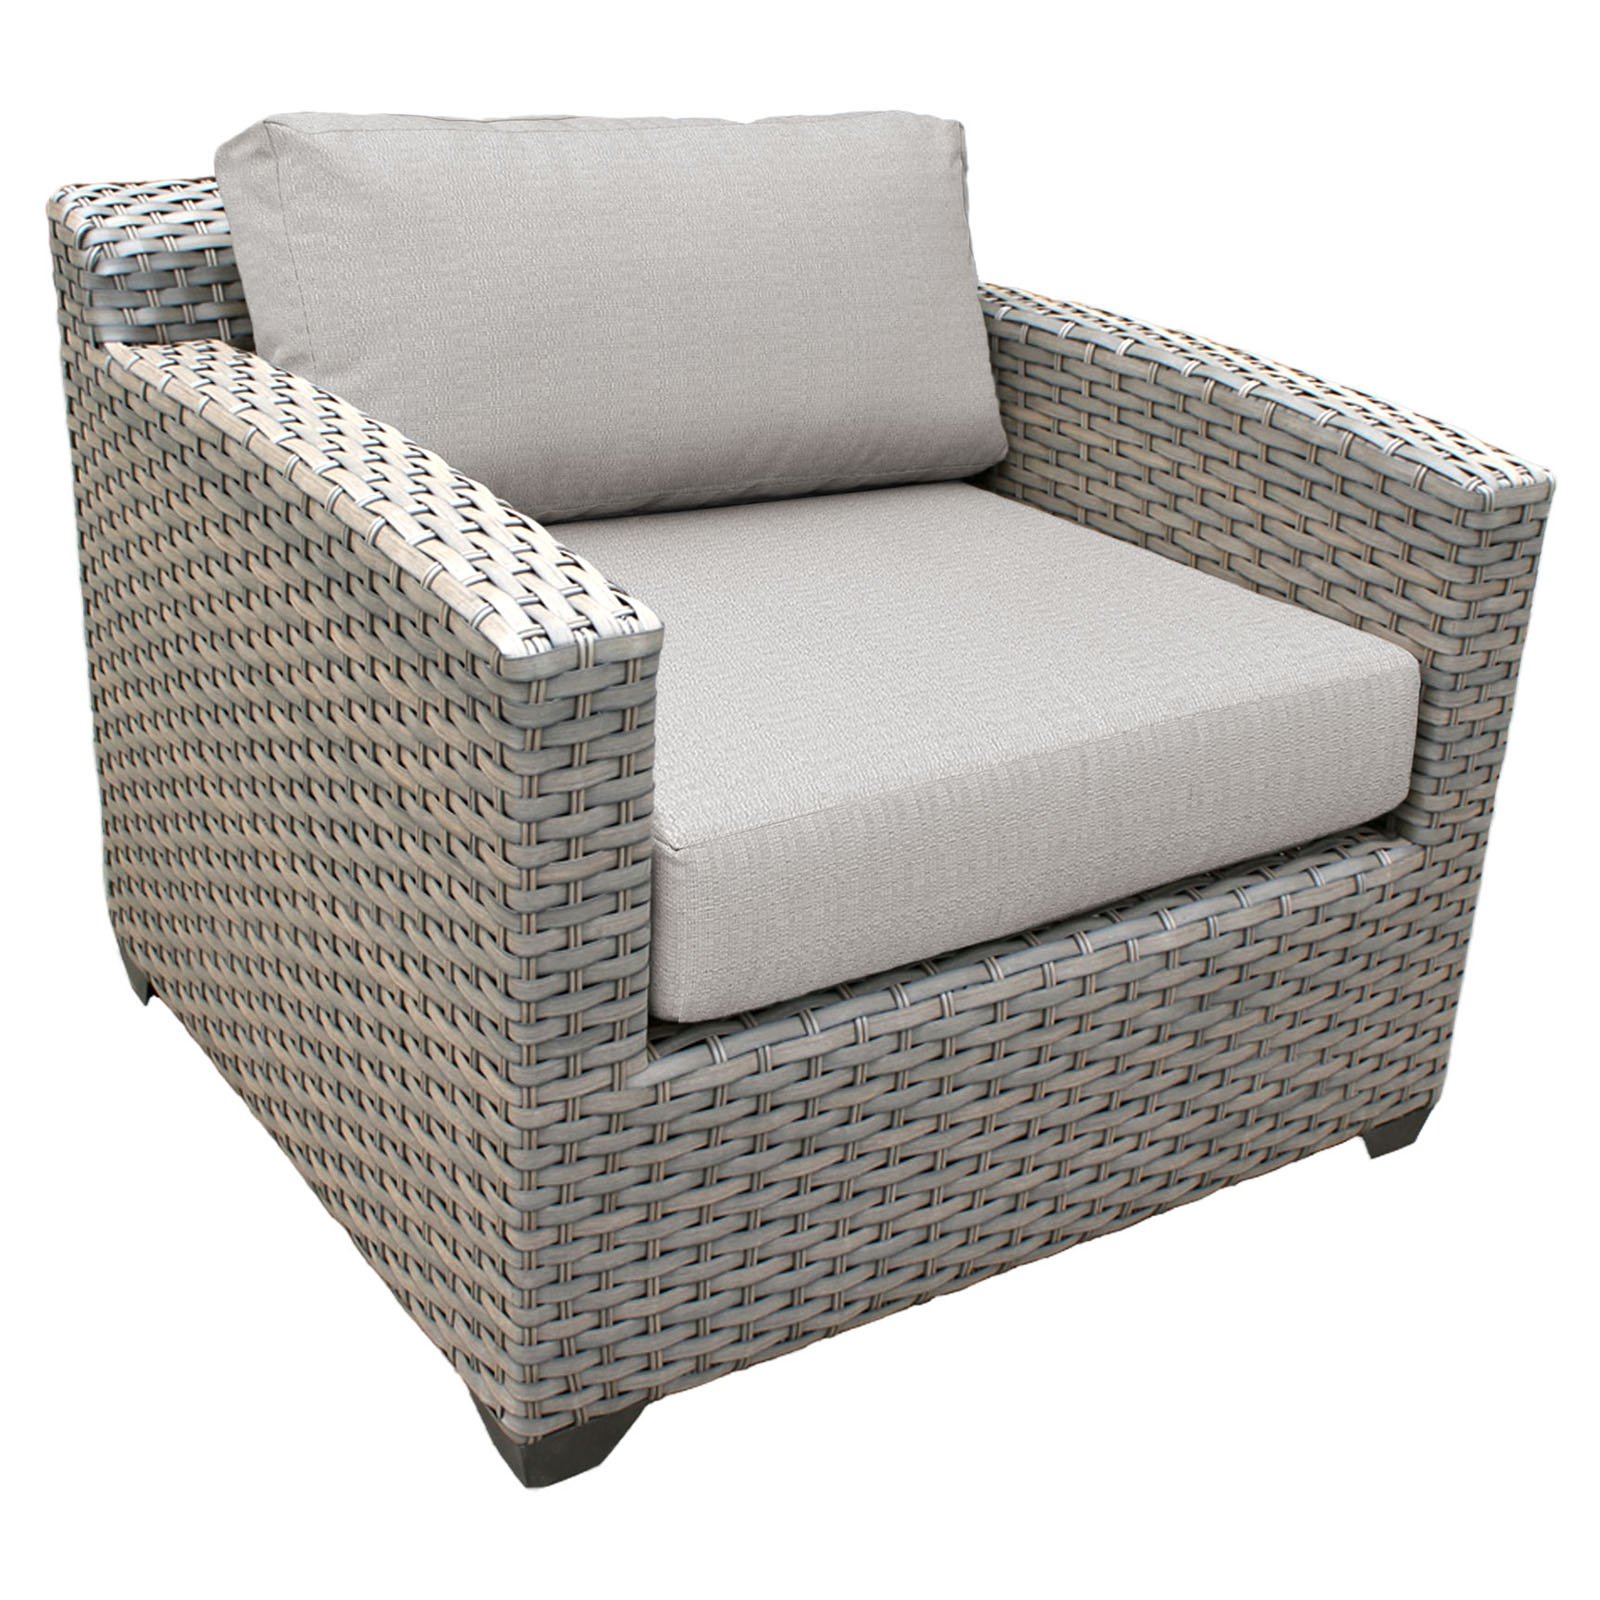 TK Classics Florence Wicker Outdoor Club Chair - Set of 2 Cushion Covers - image 1 of 2